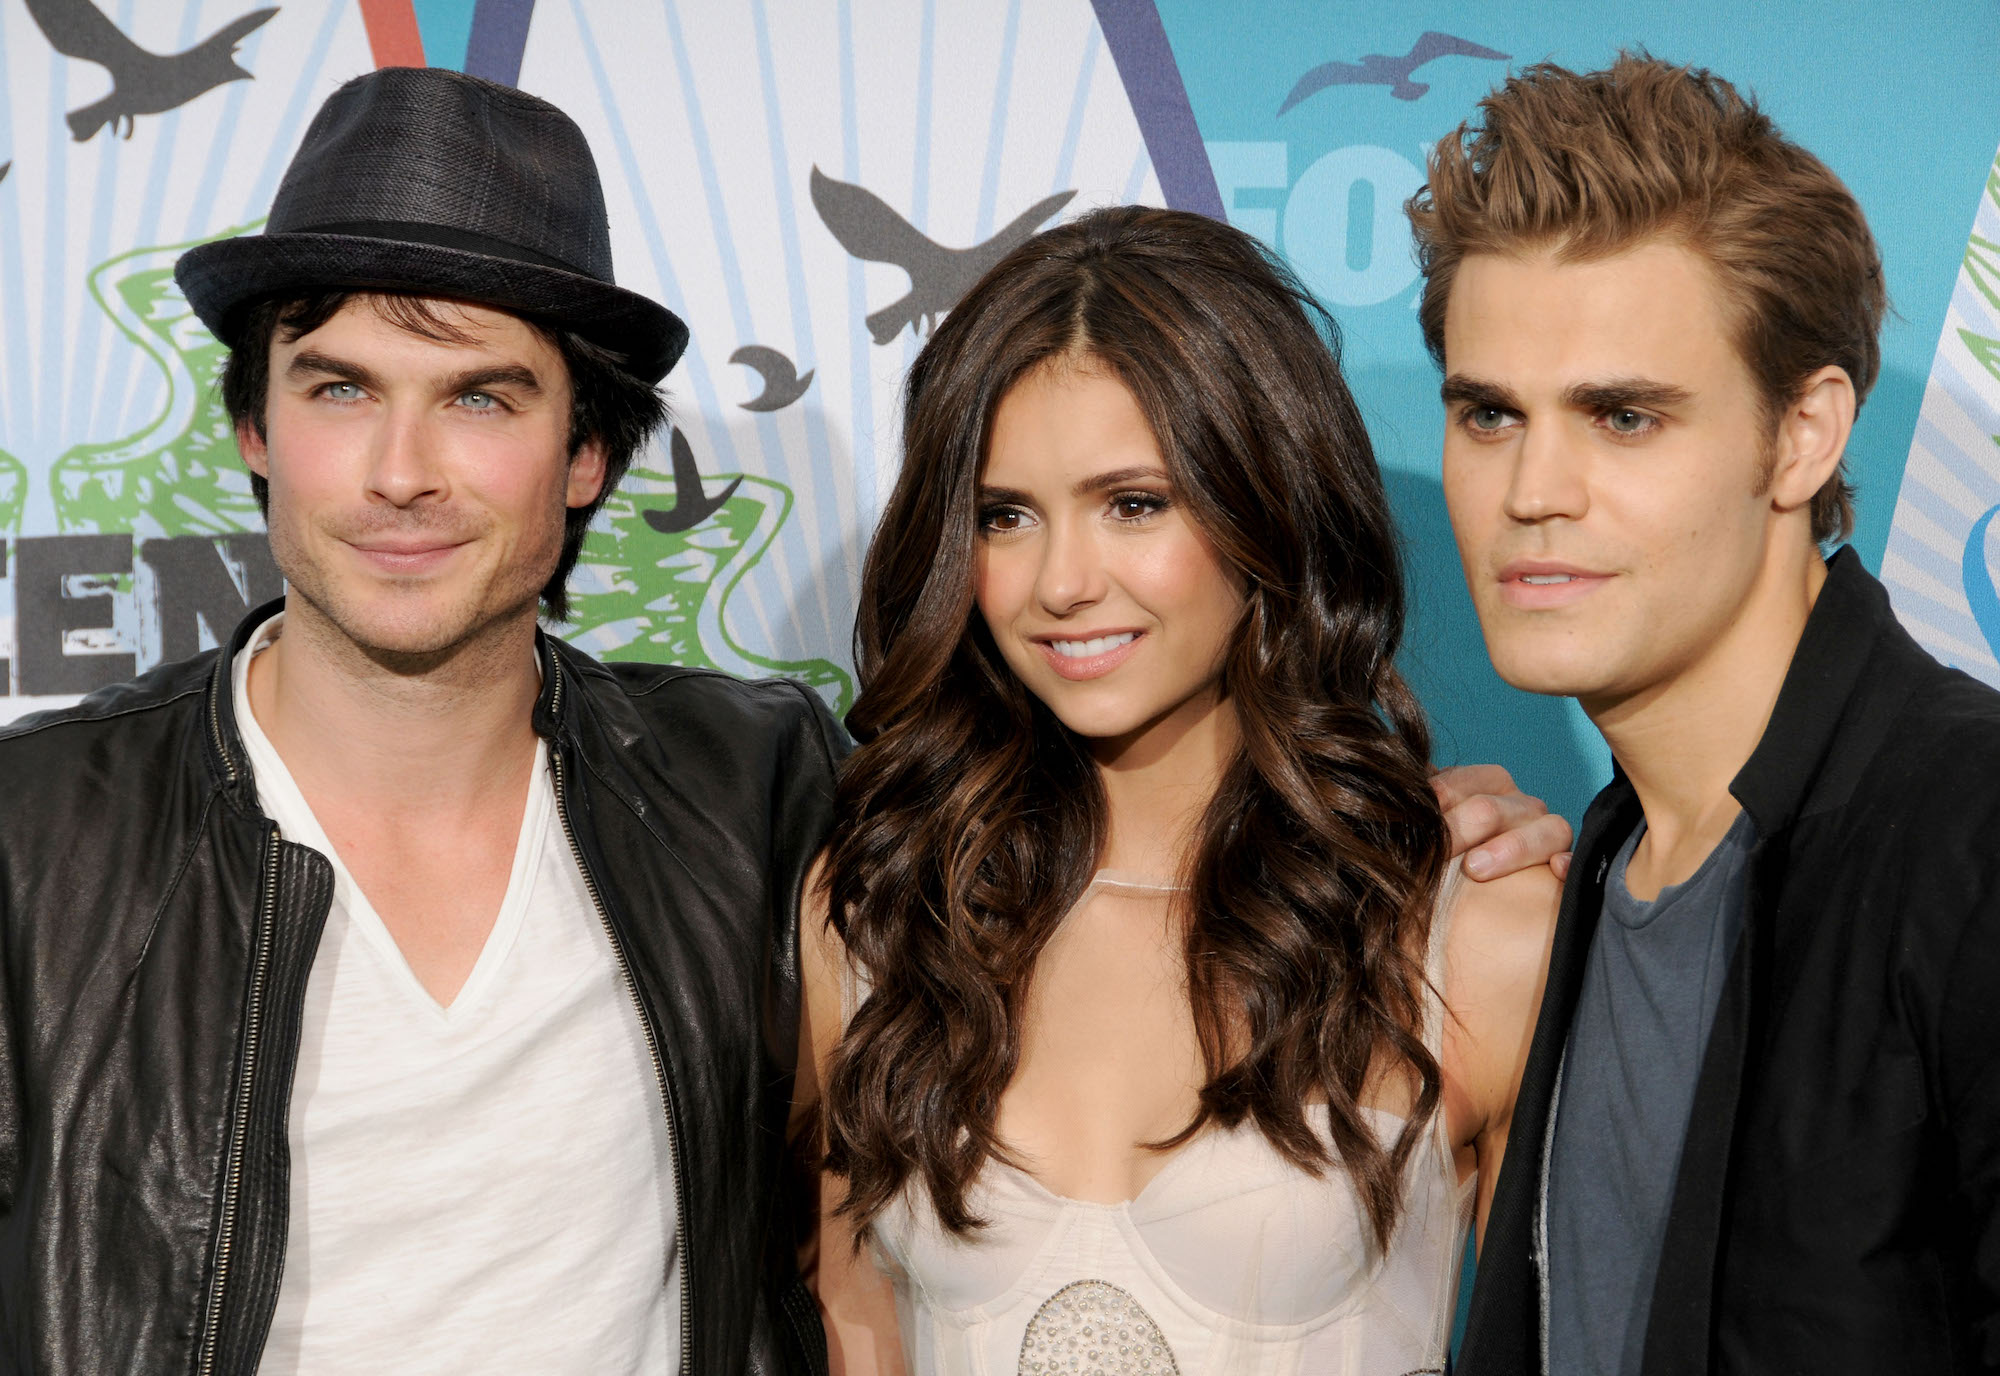 ‘The Vampire Diaries’: Nina Dobrev Once Admitted She Didn’t Get Along With 1 Co-Star